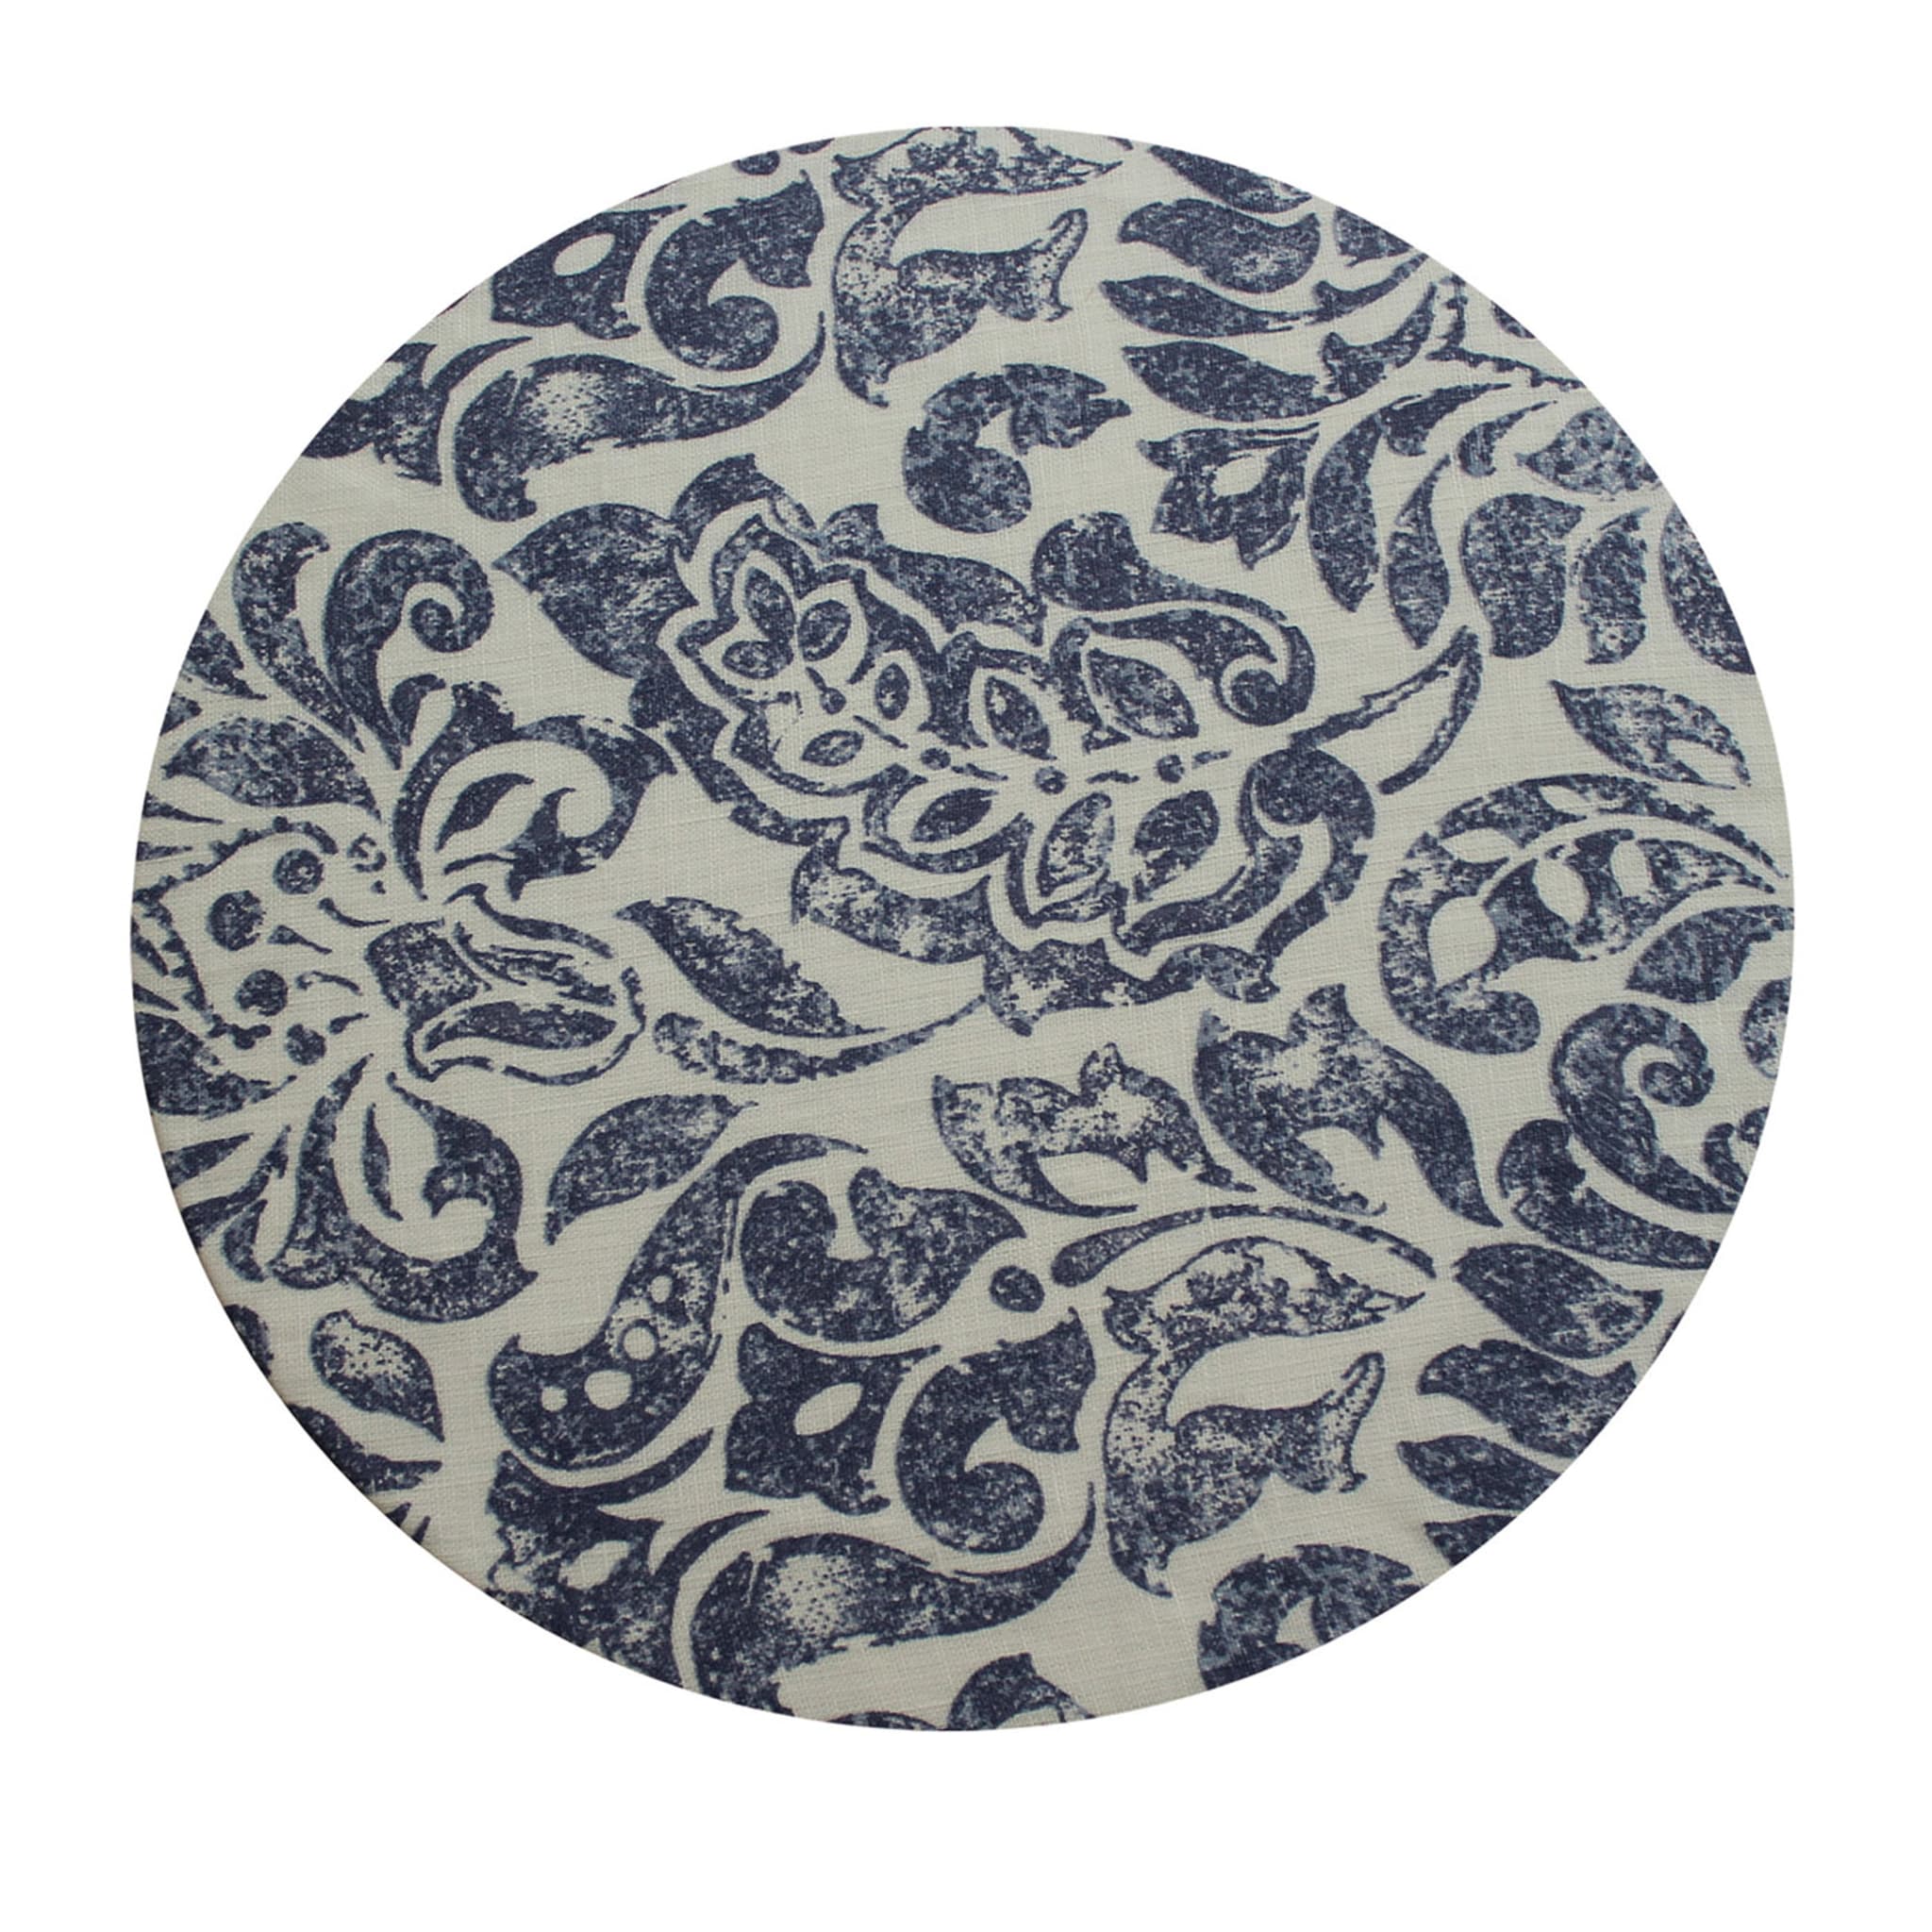 Cuffietta Large Round Damask White & Periwinkle Placemat - Main view